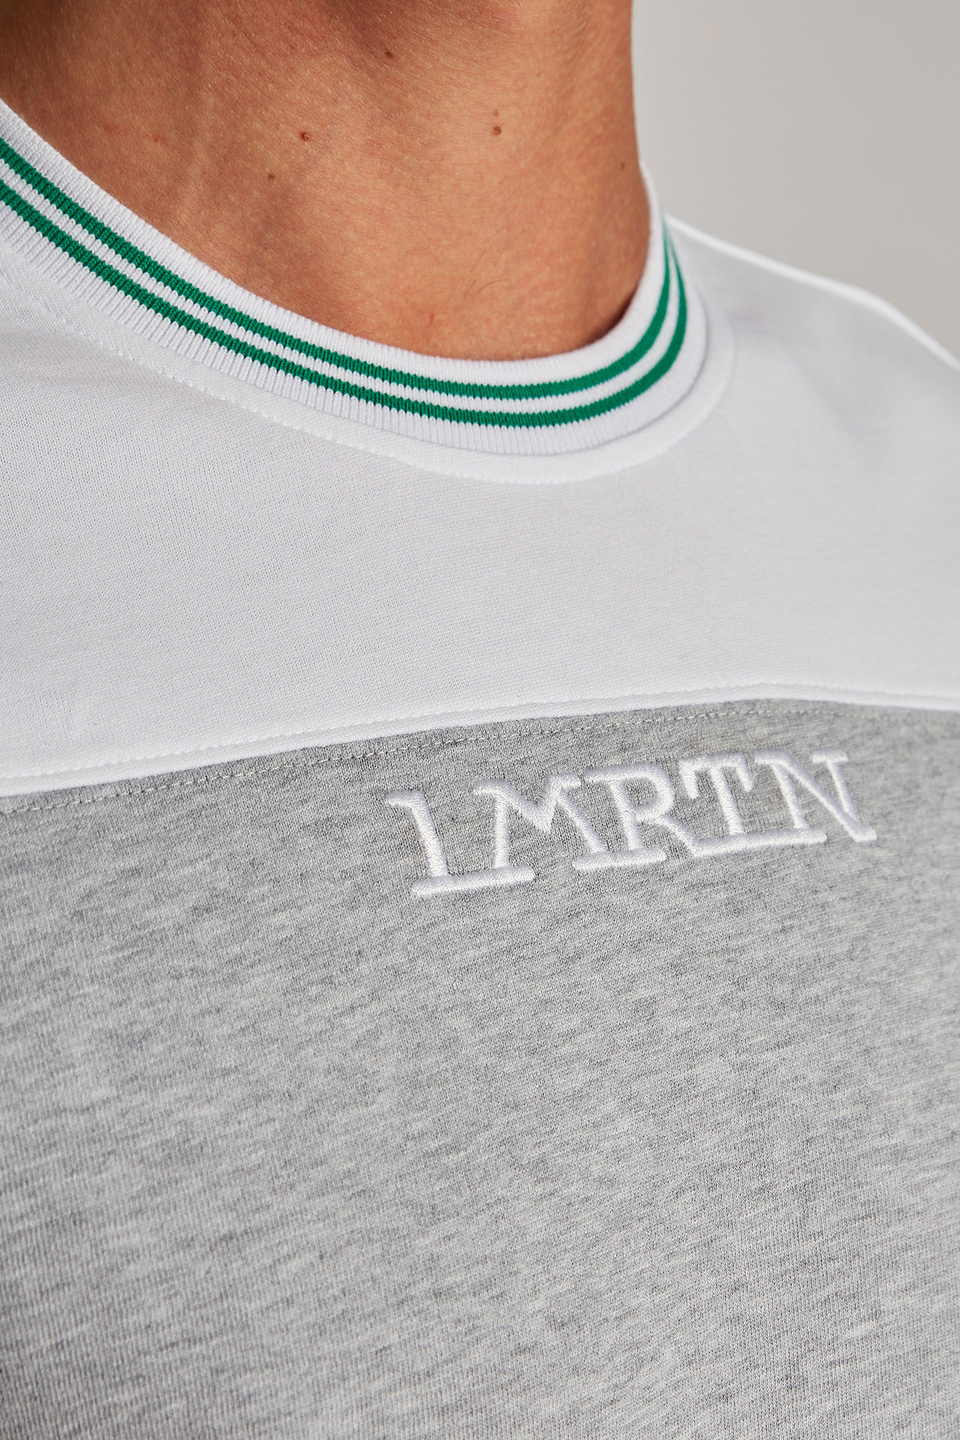 Men's oversized short-sleeved T-shirt featuring a contrasting collar - La Martina - Official Online Shop